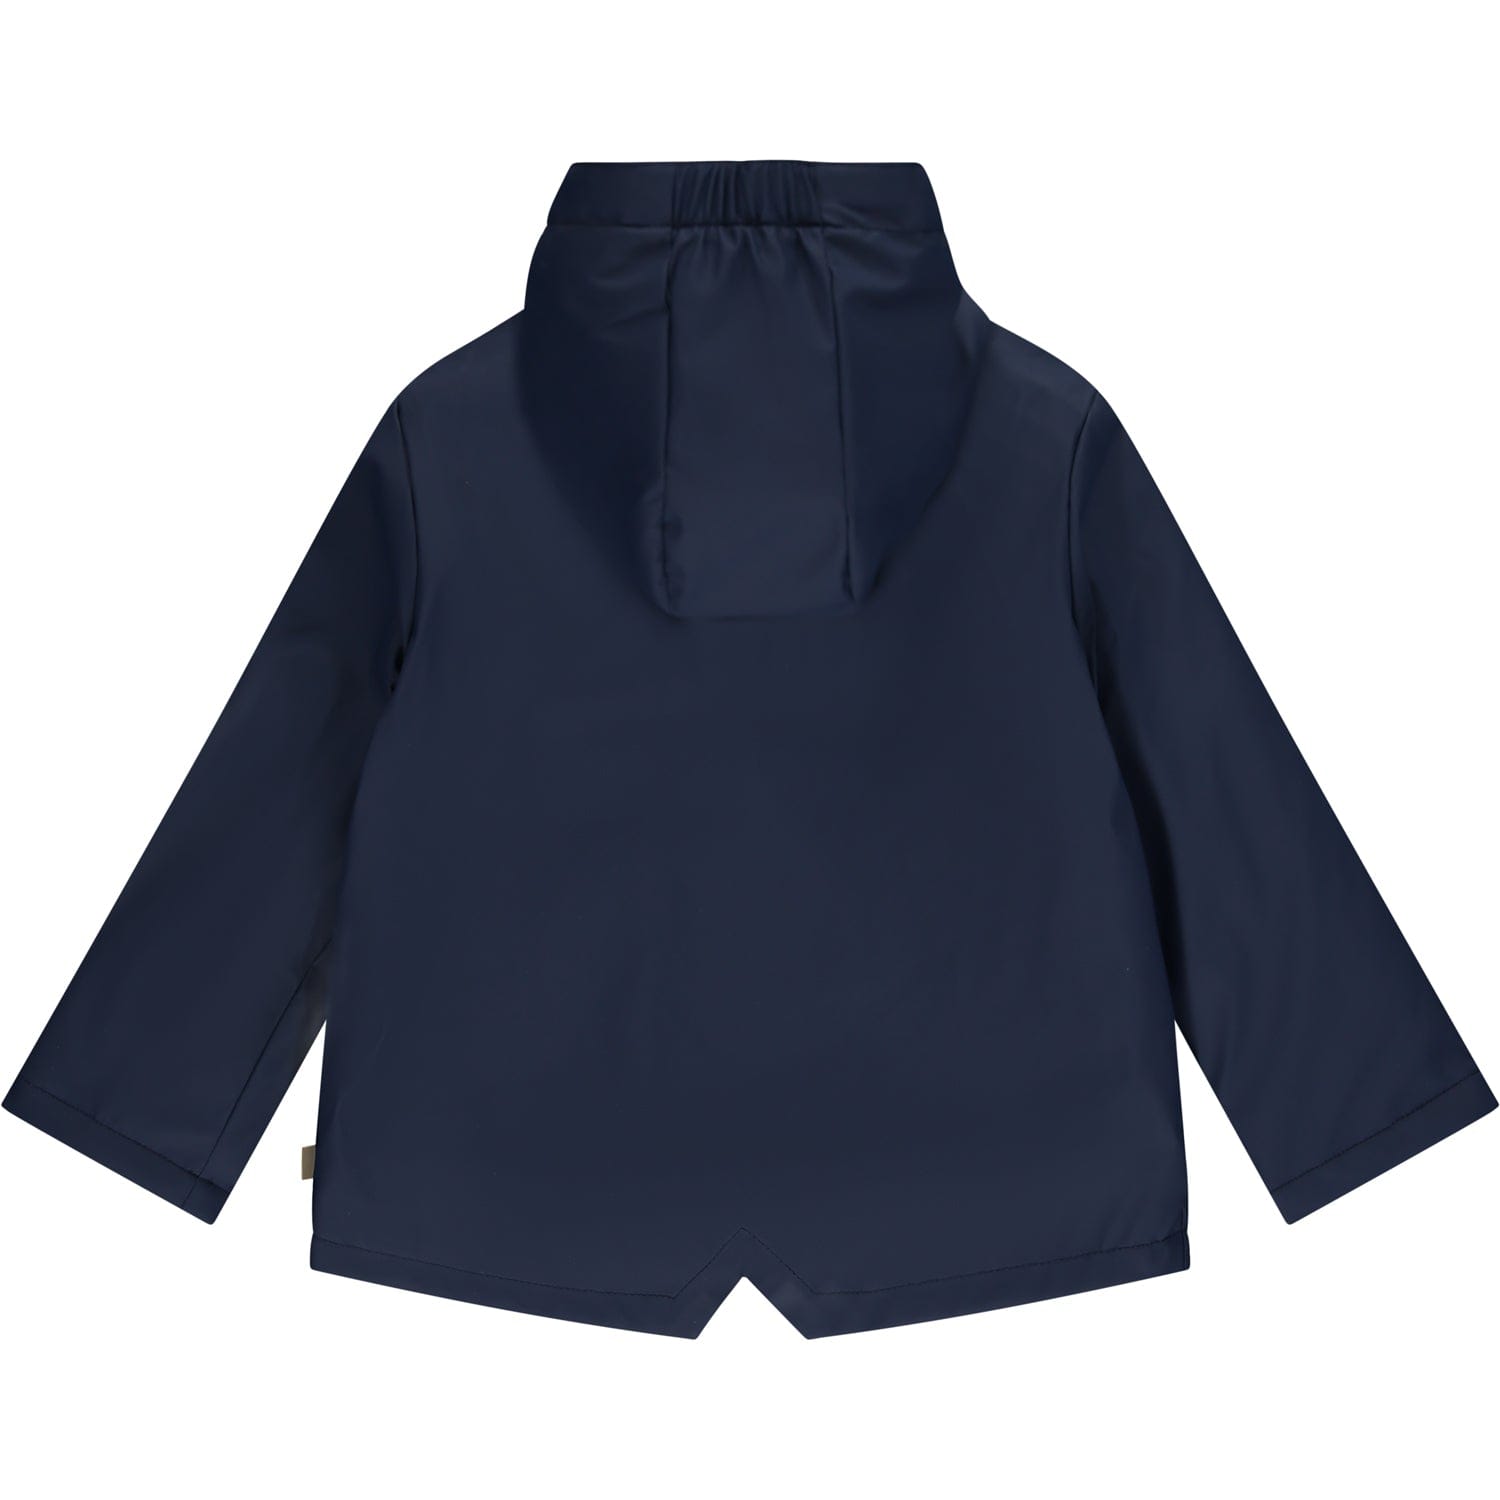 MITCH & SON - Forbes Raincoat - Blue Navy